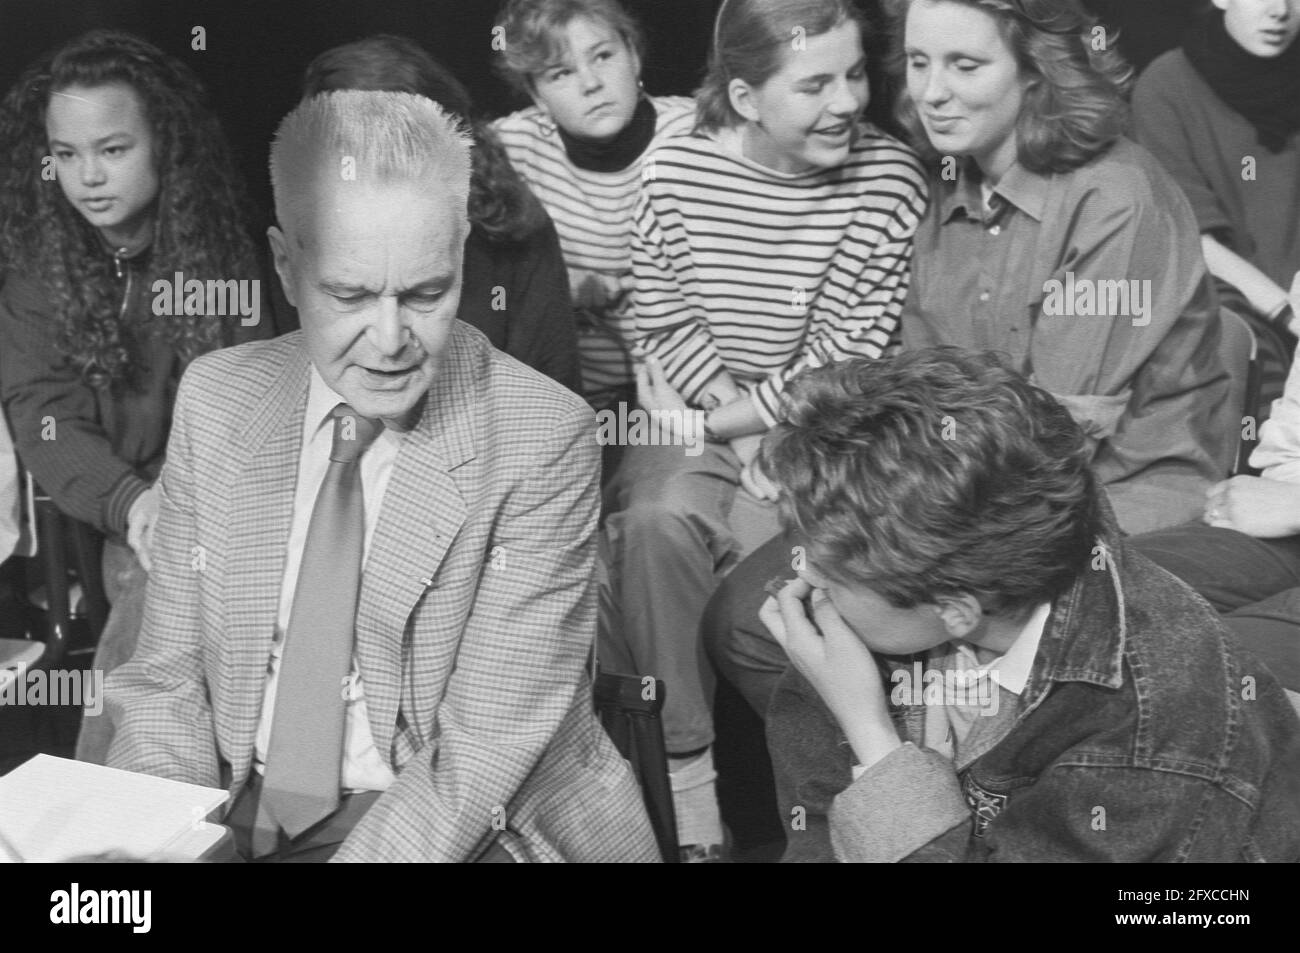 Children talk to Nobel laureates in Amsterdam; 29a, 30a: Prof. J. Tinbergen, May 30, 1987, Children, laureates, The Netherlands, 20th century press agency photo, news to remember, documentary, historic photography 1945-1990, visual stories, human history of the Twentieth Century, capturing moments in time Stock Photo